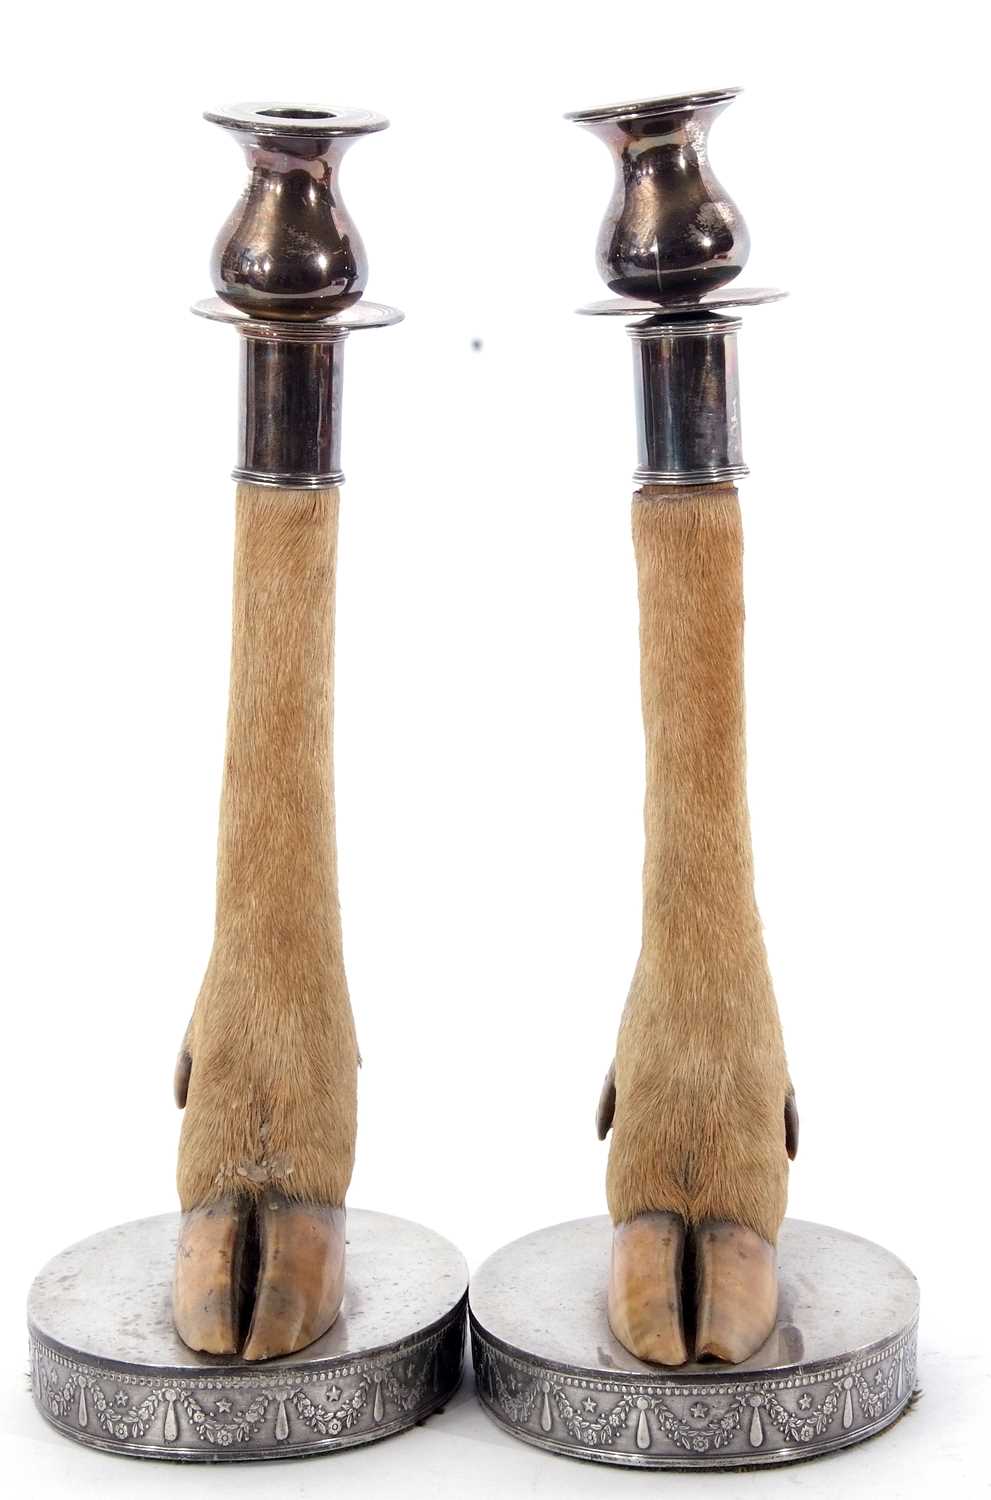 Pair of early 20th century novelty candlesticks, silver plated nozzles and mounts on the lower leg - Image 4 of 4